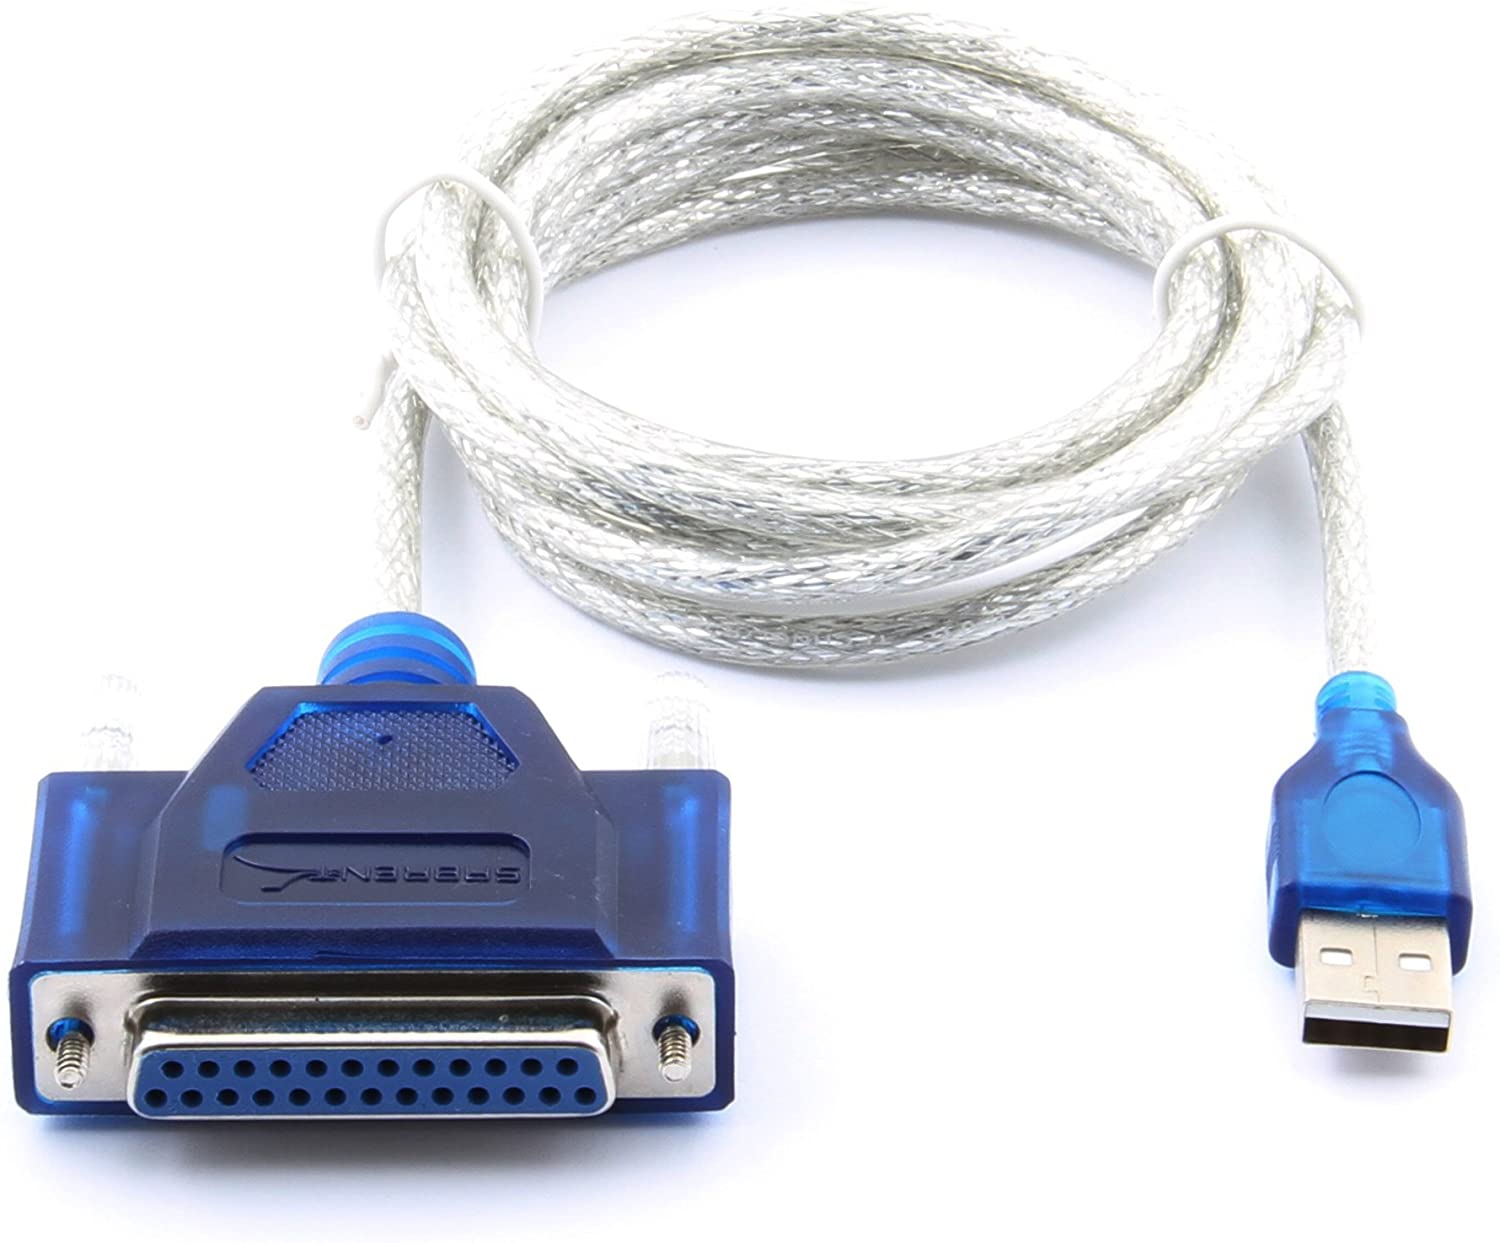 Sabrent Usb 20 To Db25f Parallel Printer Cable Colors May Vary Usb 9295